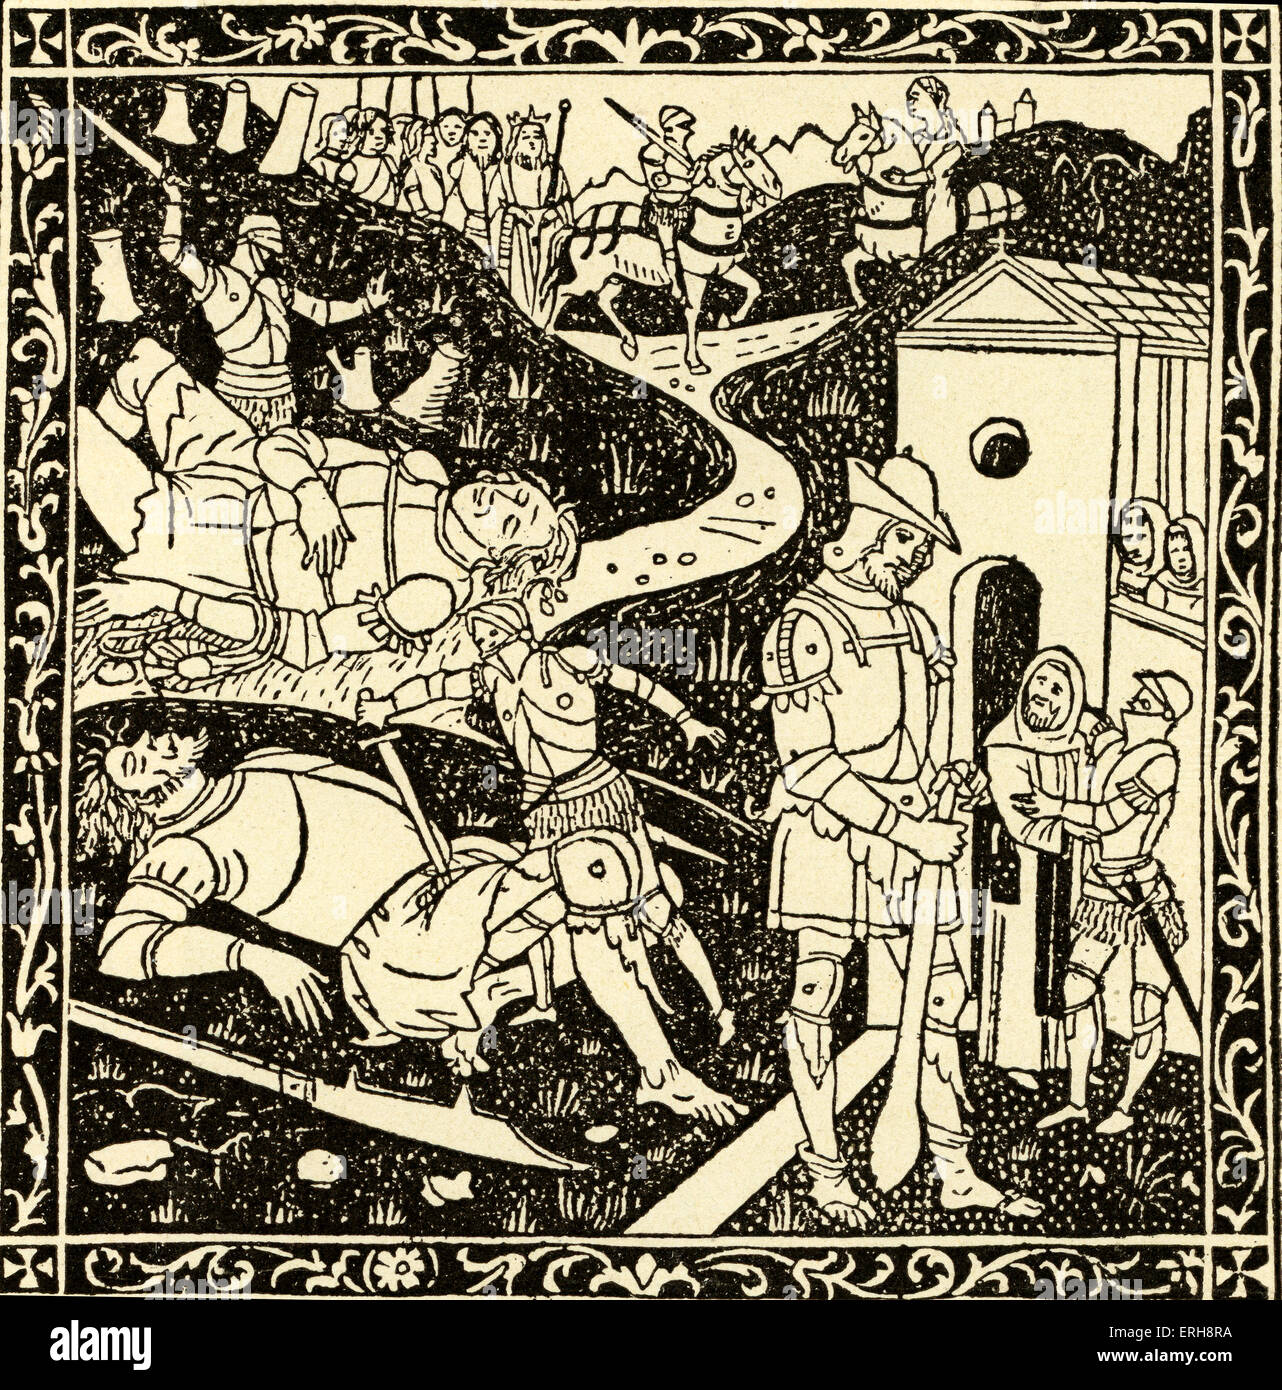 Morgante Maggiore by Luigi Pulci - from wood cut of scene in epic poem, published in final form in 1483. Poem tells the story of Orlando and Renaud de Montauban (in Italian, Renaldo or Rinaldo), the most famous of Charlemagne 's warriors. Morgante is a giant. Caption: 'Roland freed the Abbey of three giants; two lie vanquished, the third, Morgante, is a Christian and has become Roland's friend. On their departure, the Abbot blesses them both'. Stock Photo